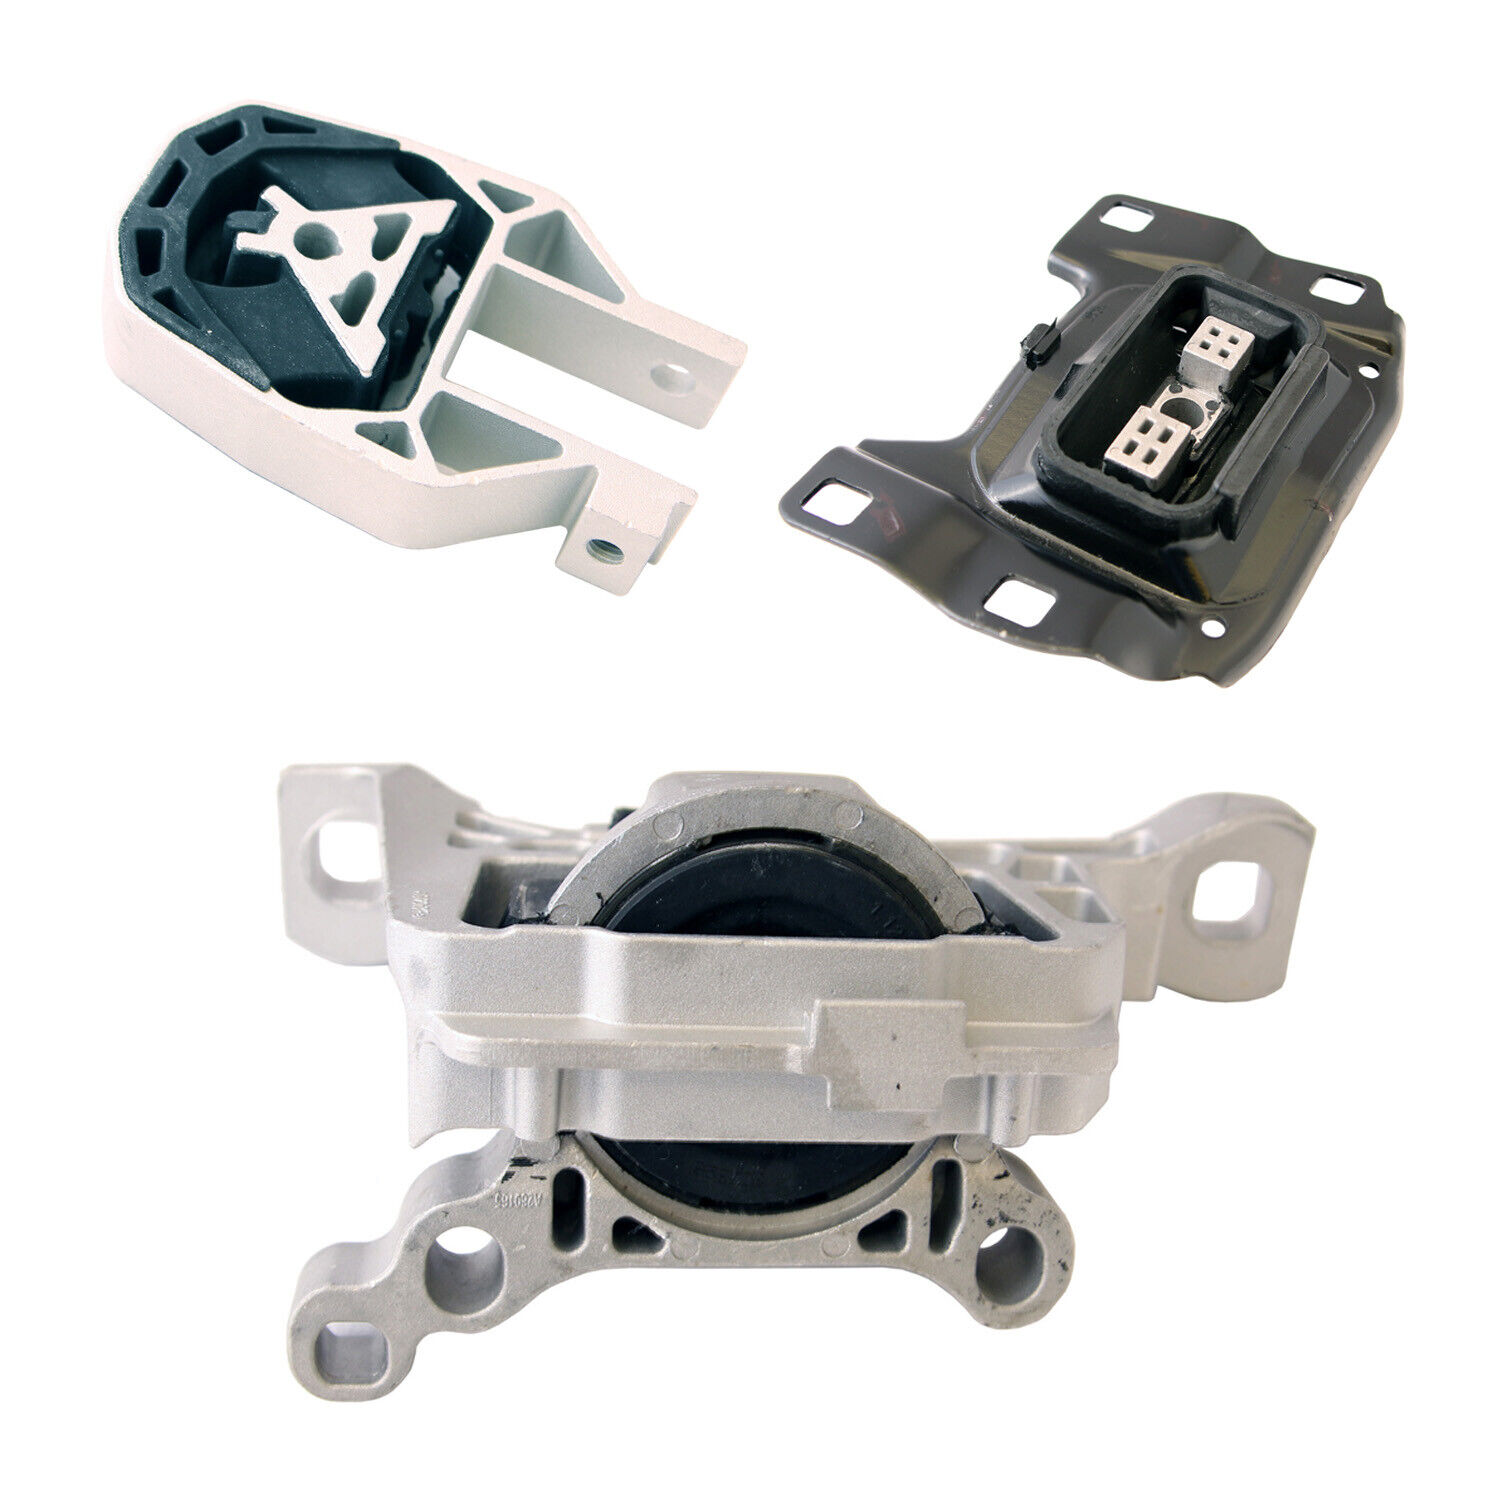 3pc Engine Mount Set for 13-16 Ford Escape 1.5L Automatic - Motor Mount Kit